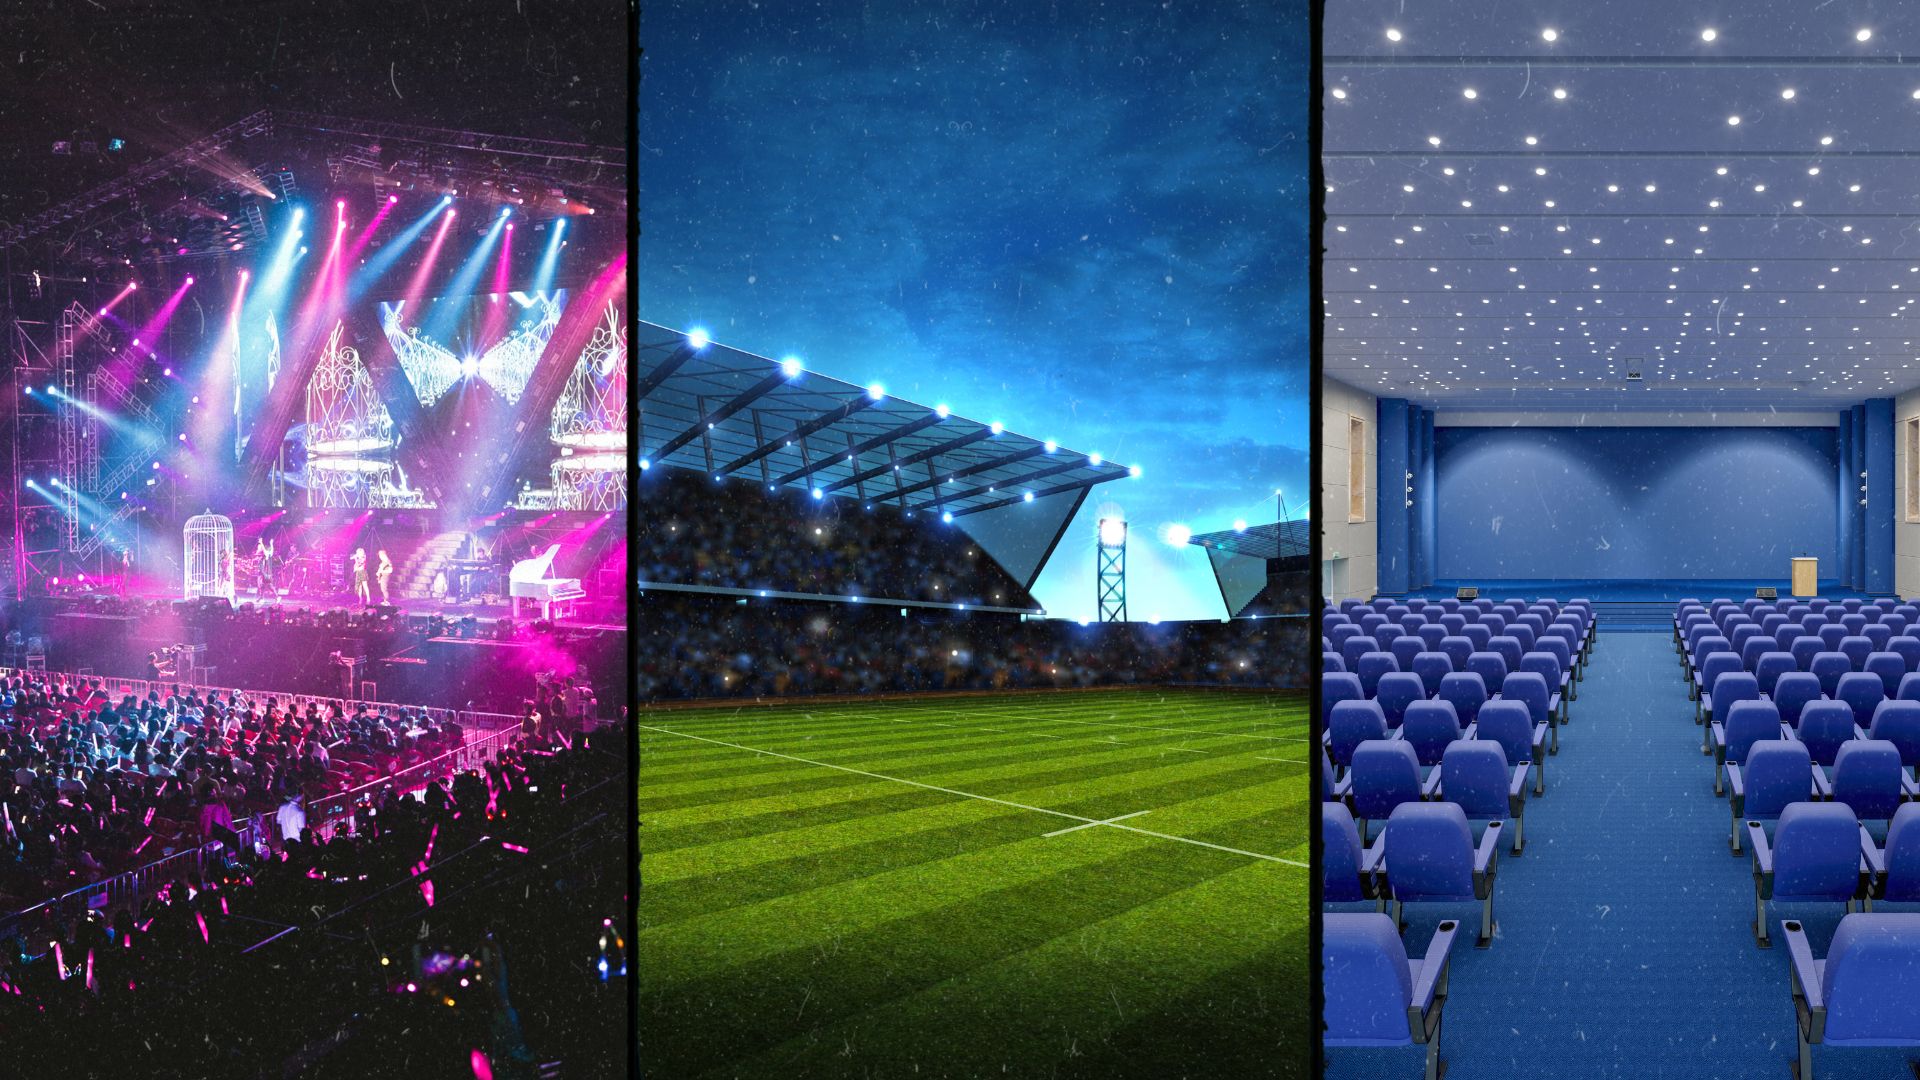 Concert, Sporting Events, and Conventions